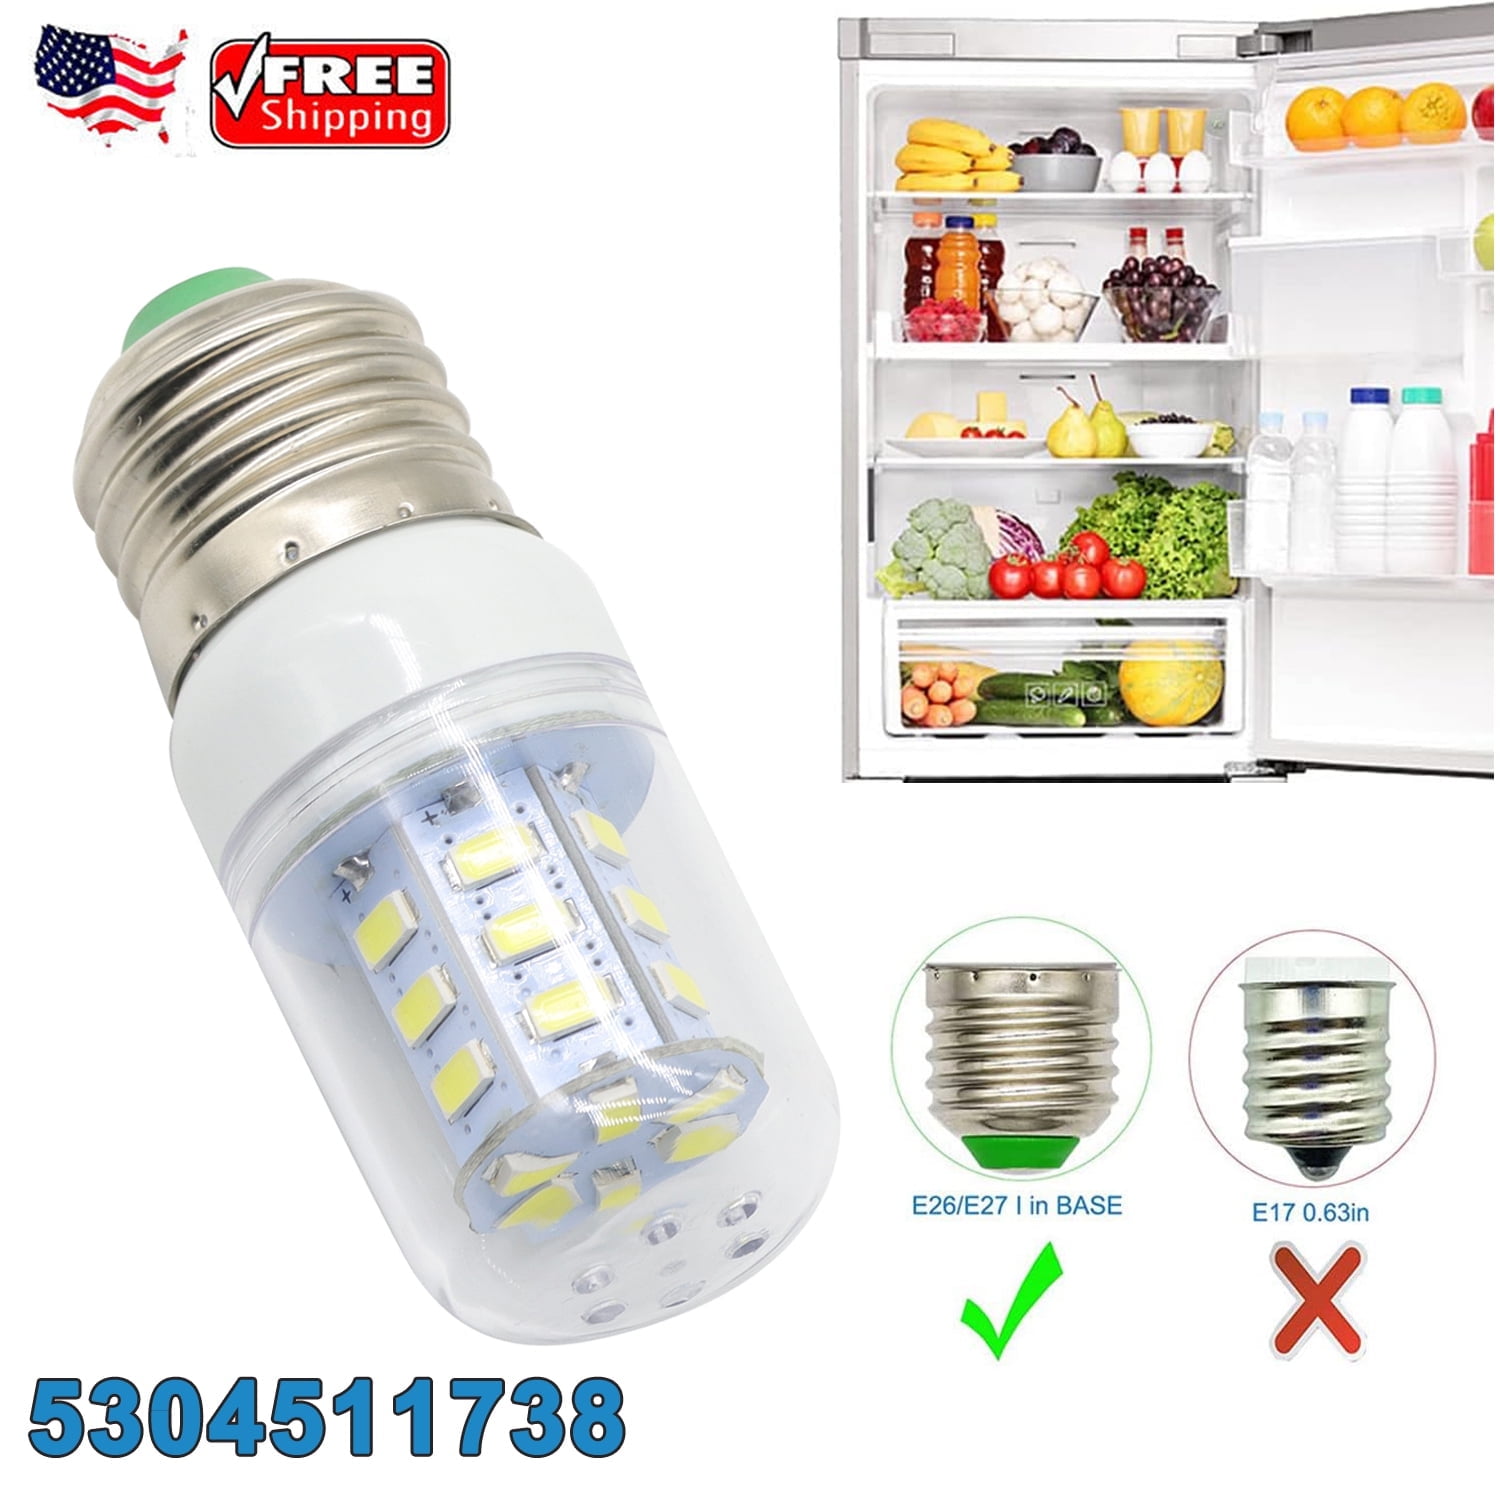 Updated 5304511738 LED Refrigerator Light Bulb Replace PS12364857 AP6278388  4584444 KEI D34L Refrigerator Bulb Compatible With Frigidaire Kenmore